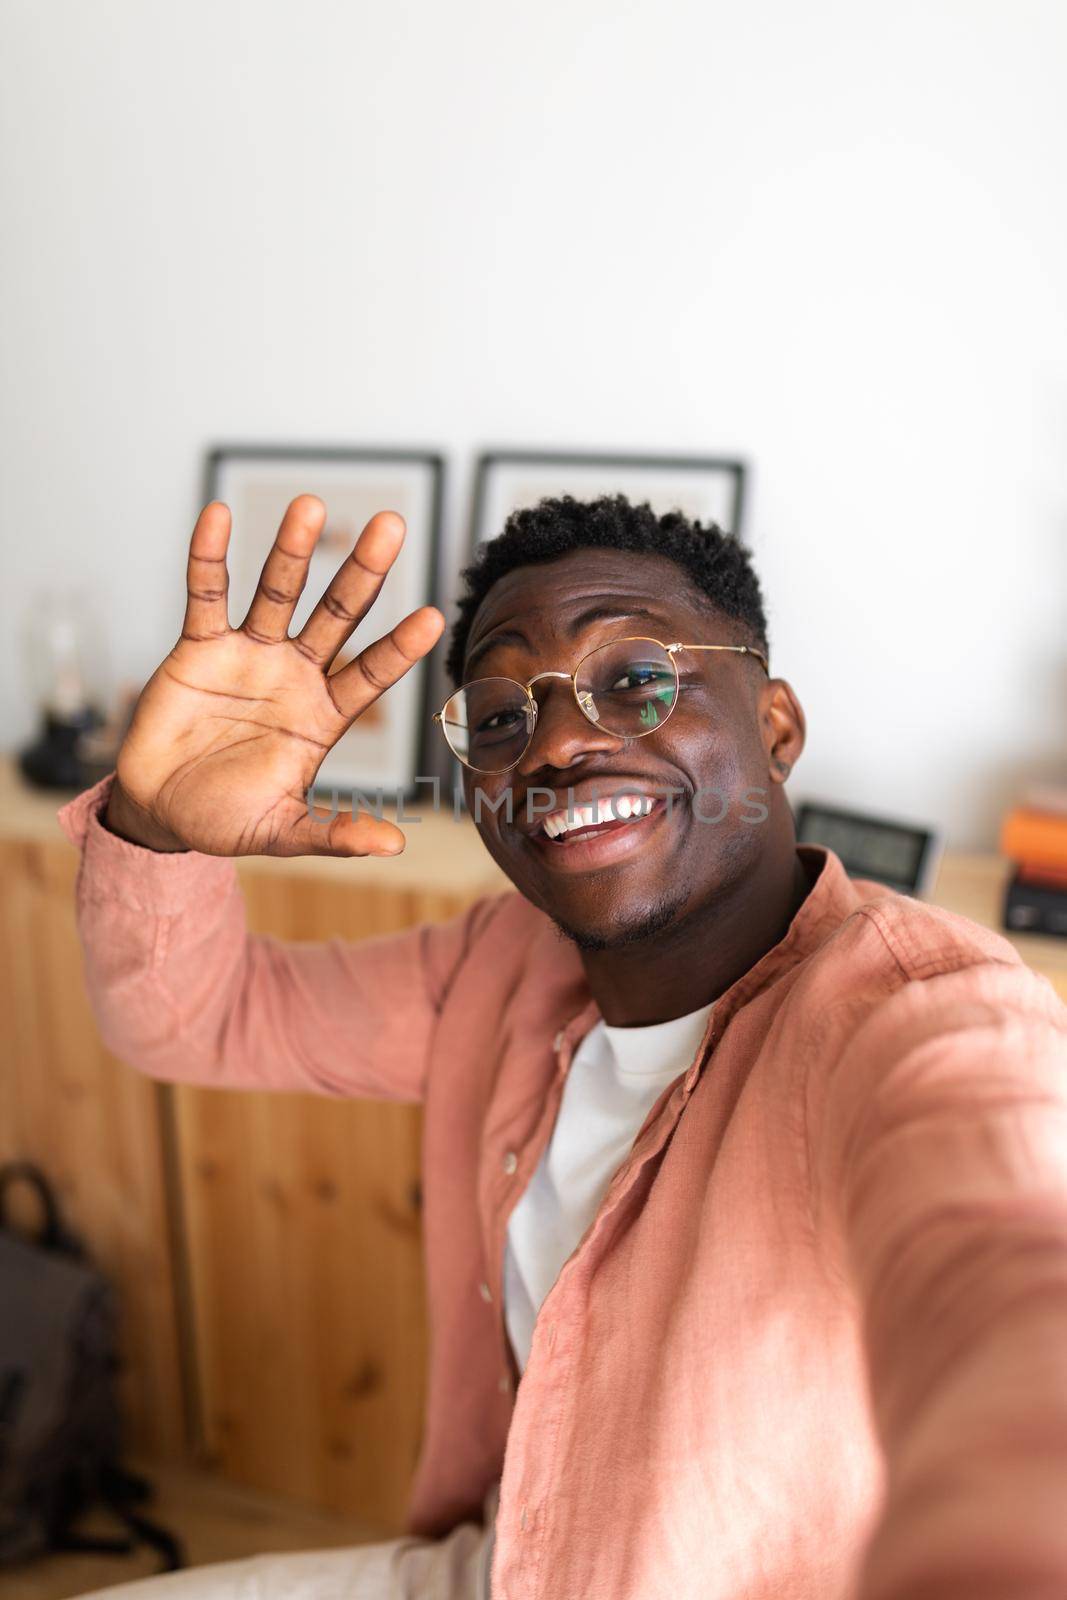 Black young man looking at camera waving hello during video call using phone. Man taking selfie at home. Copy space. Vertical image. Social media and technology concept.